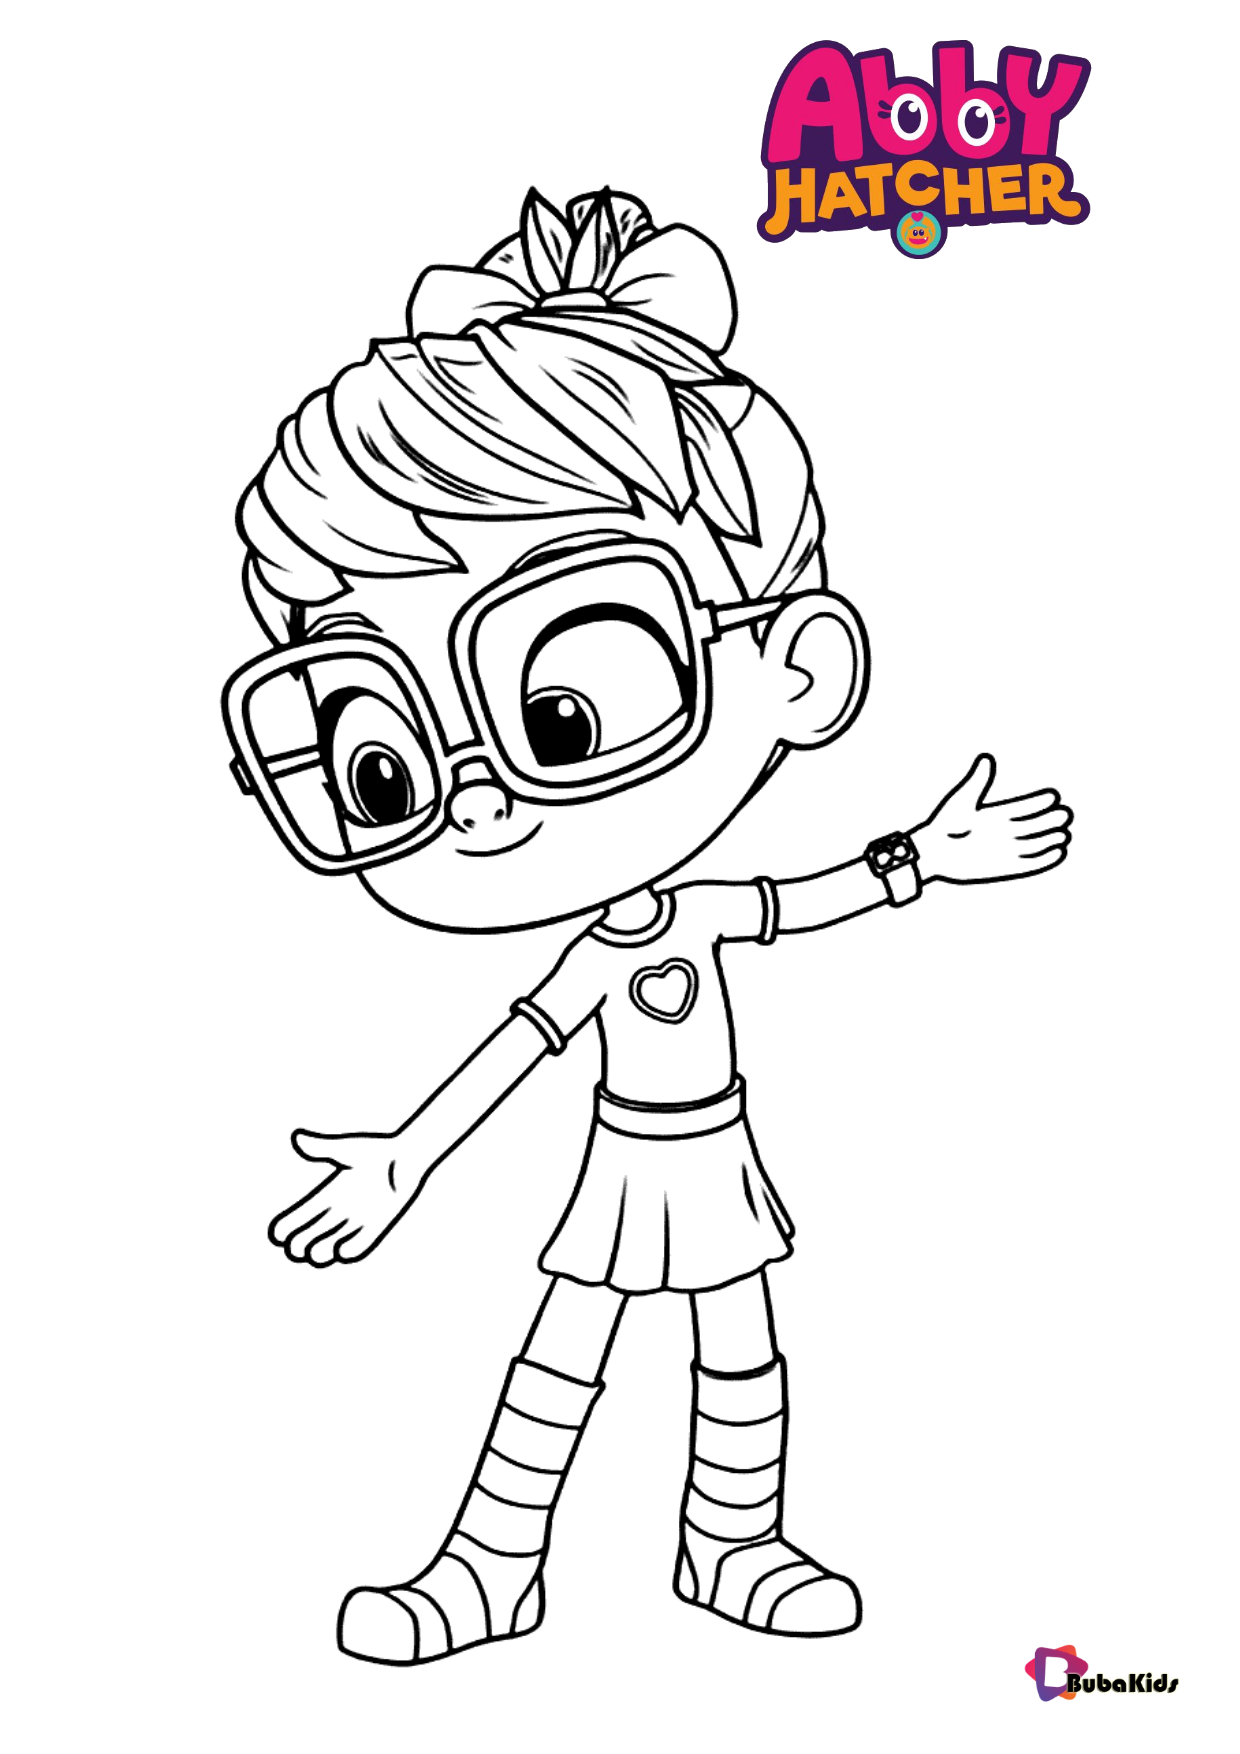 Abby Hatcher Nick jr television series coloring page